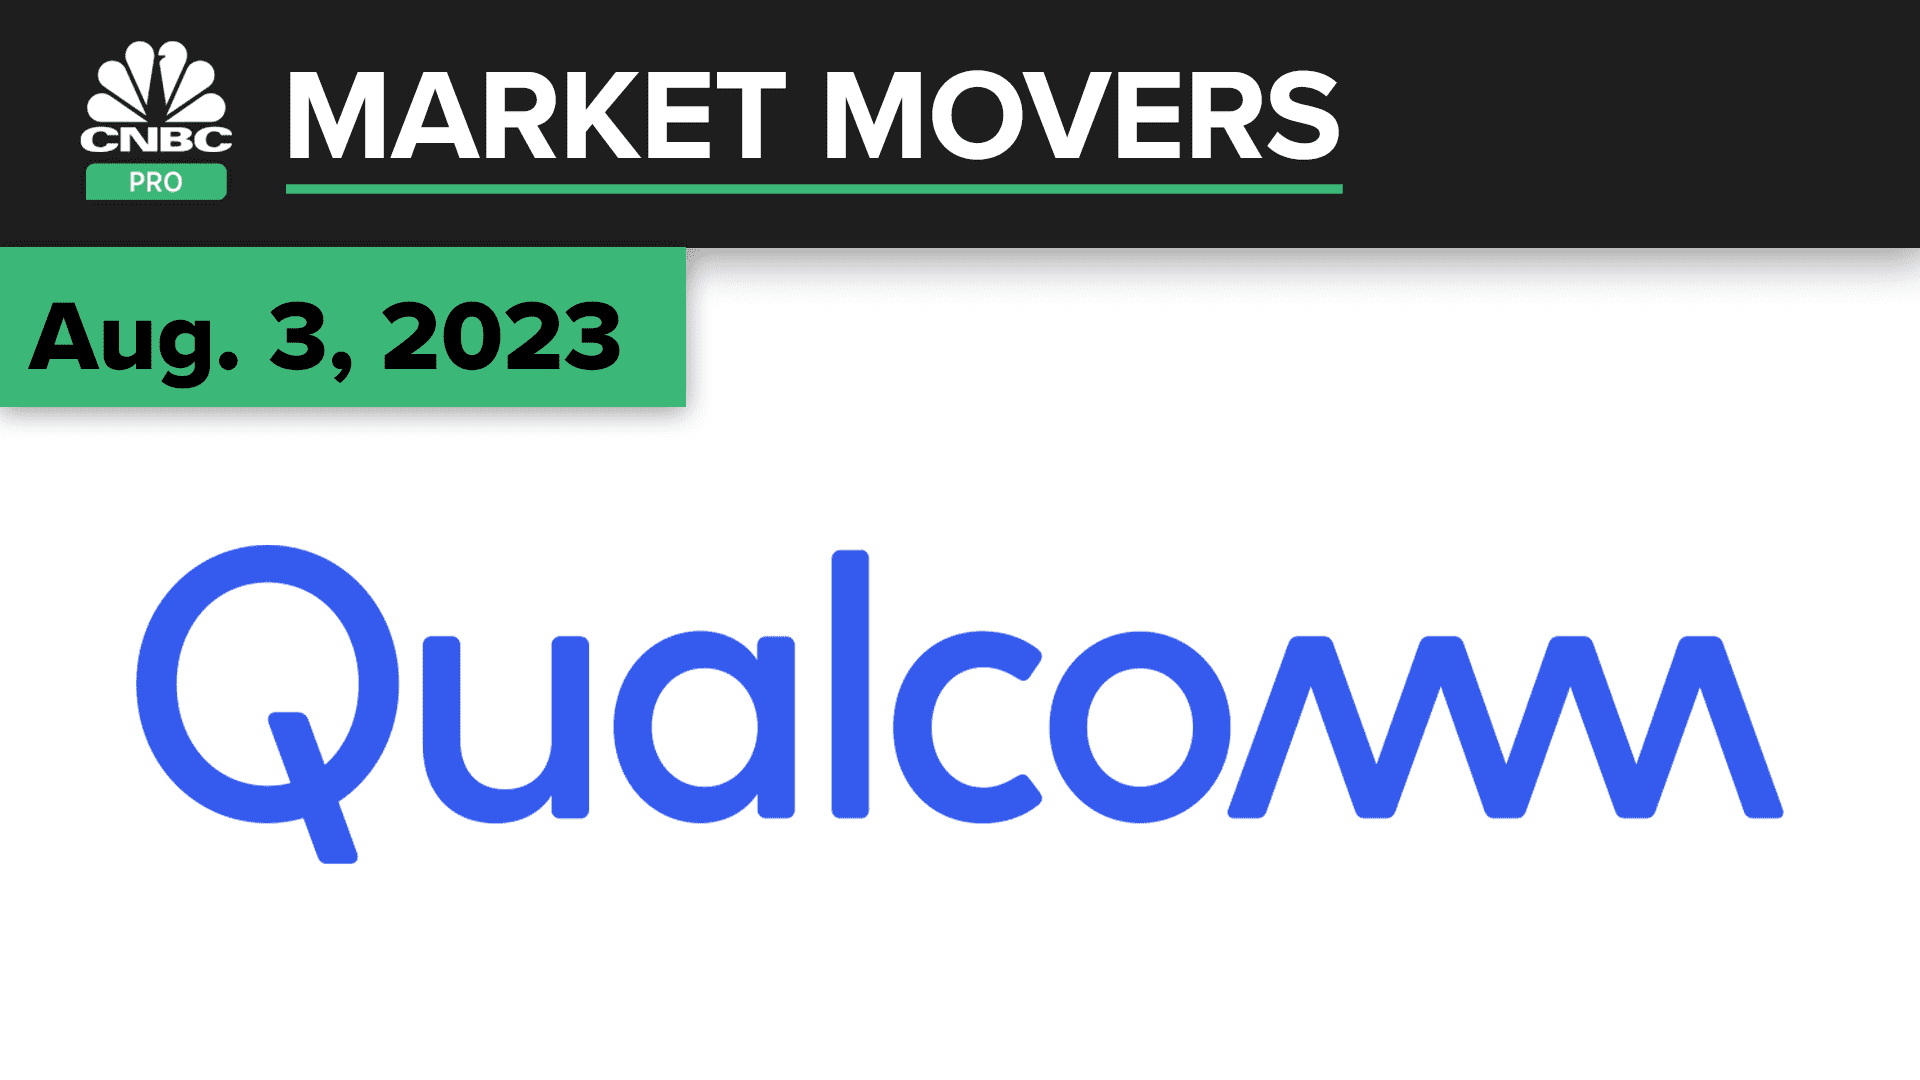 Qualcomm shares tumble as phone chip sales falter. Here's what the pros are saying